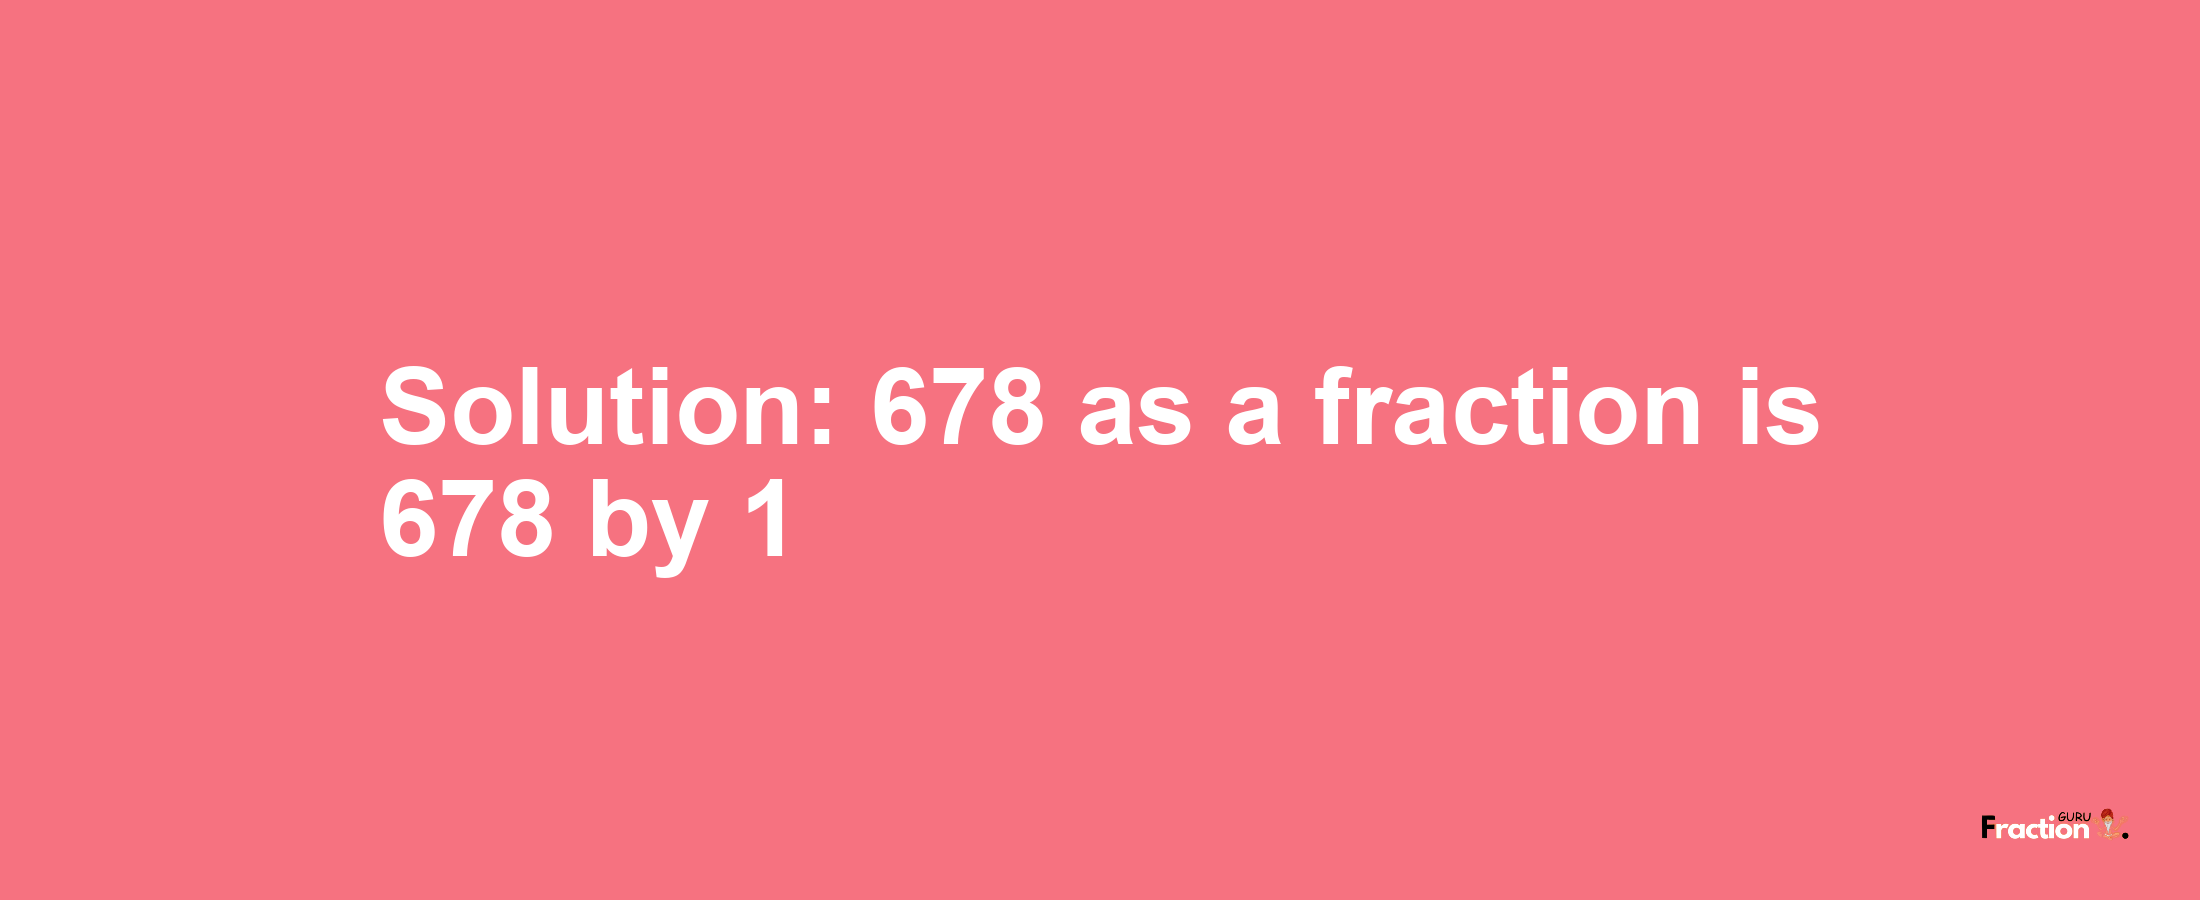 Solution:678 as a fraction is 678/1